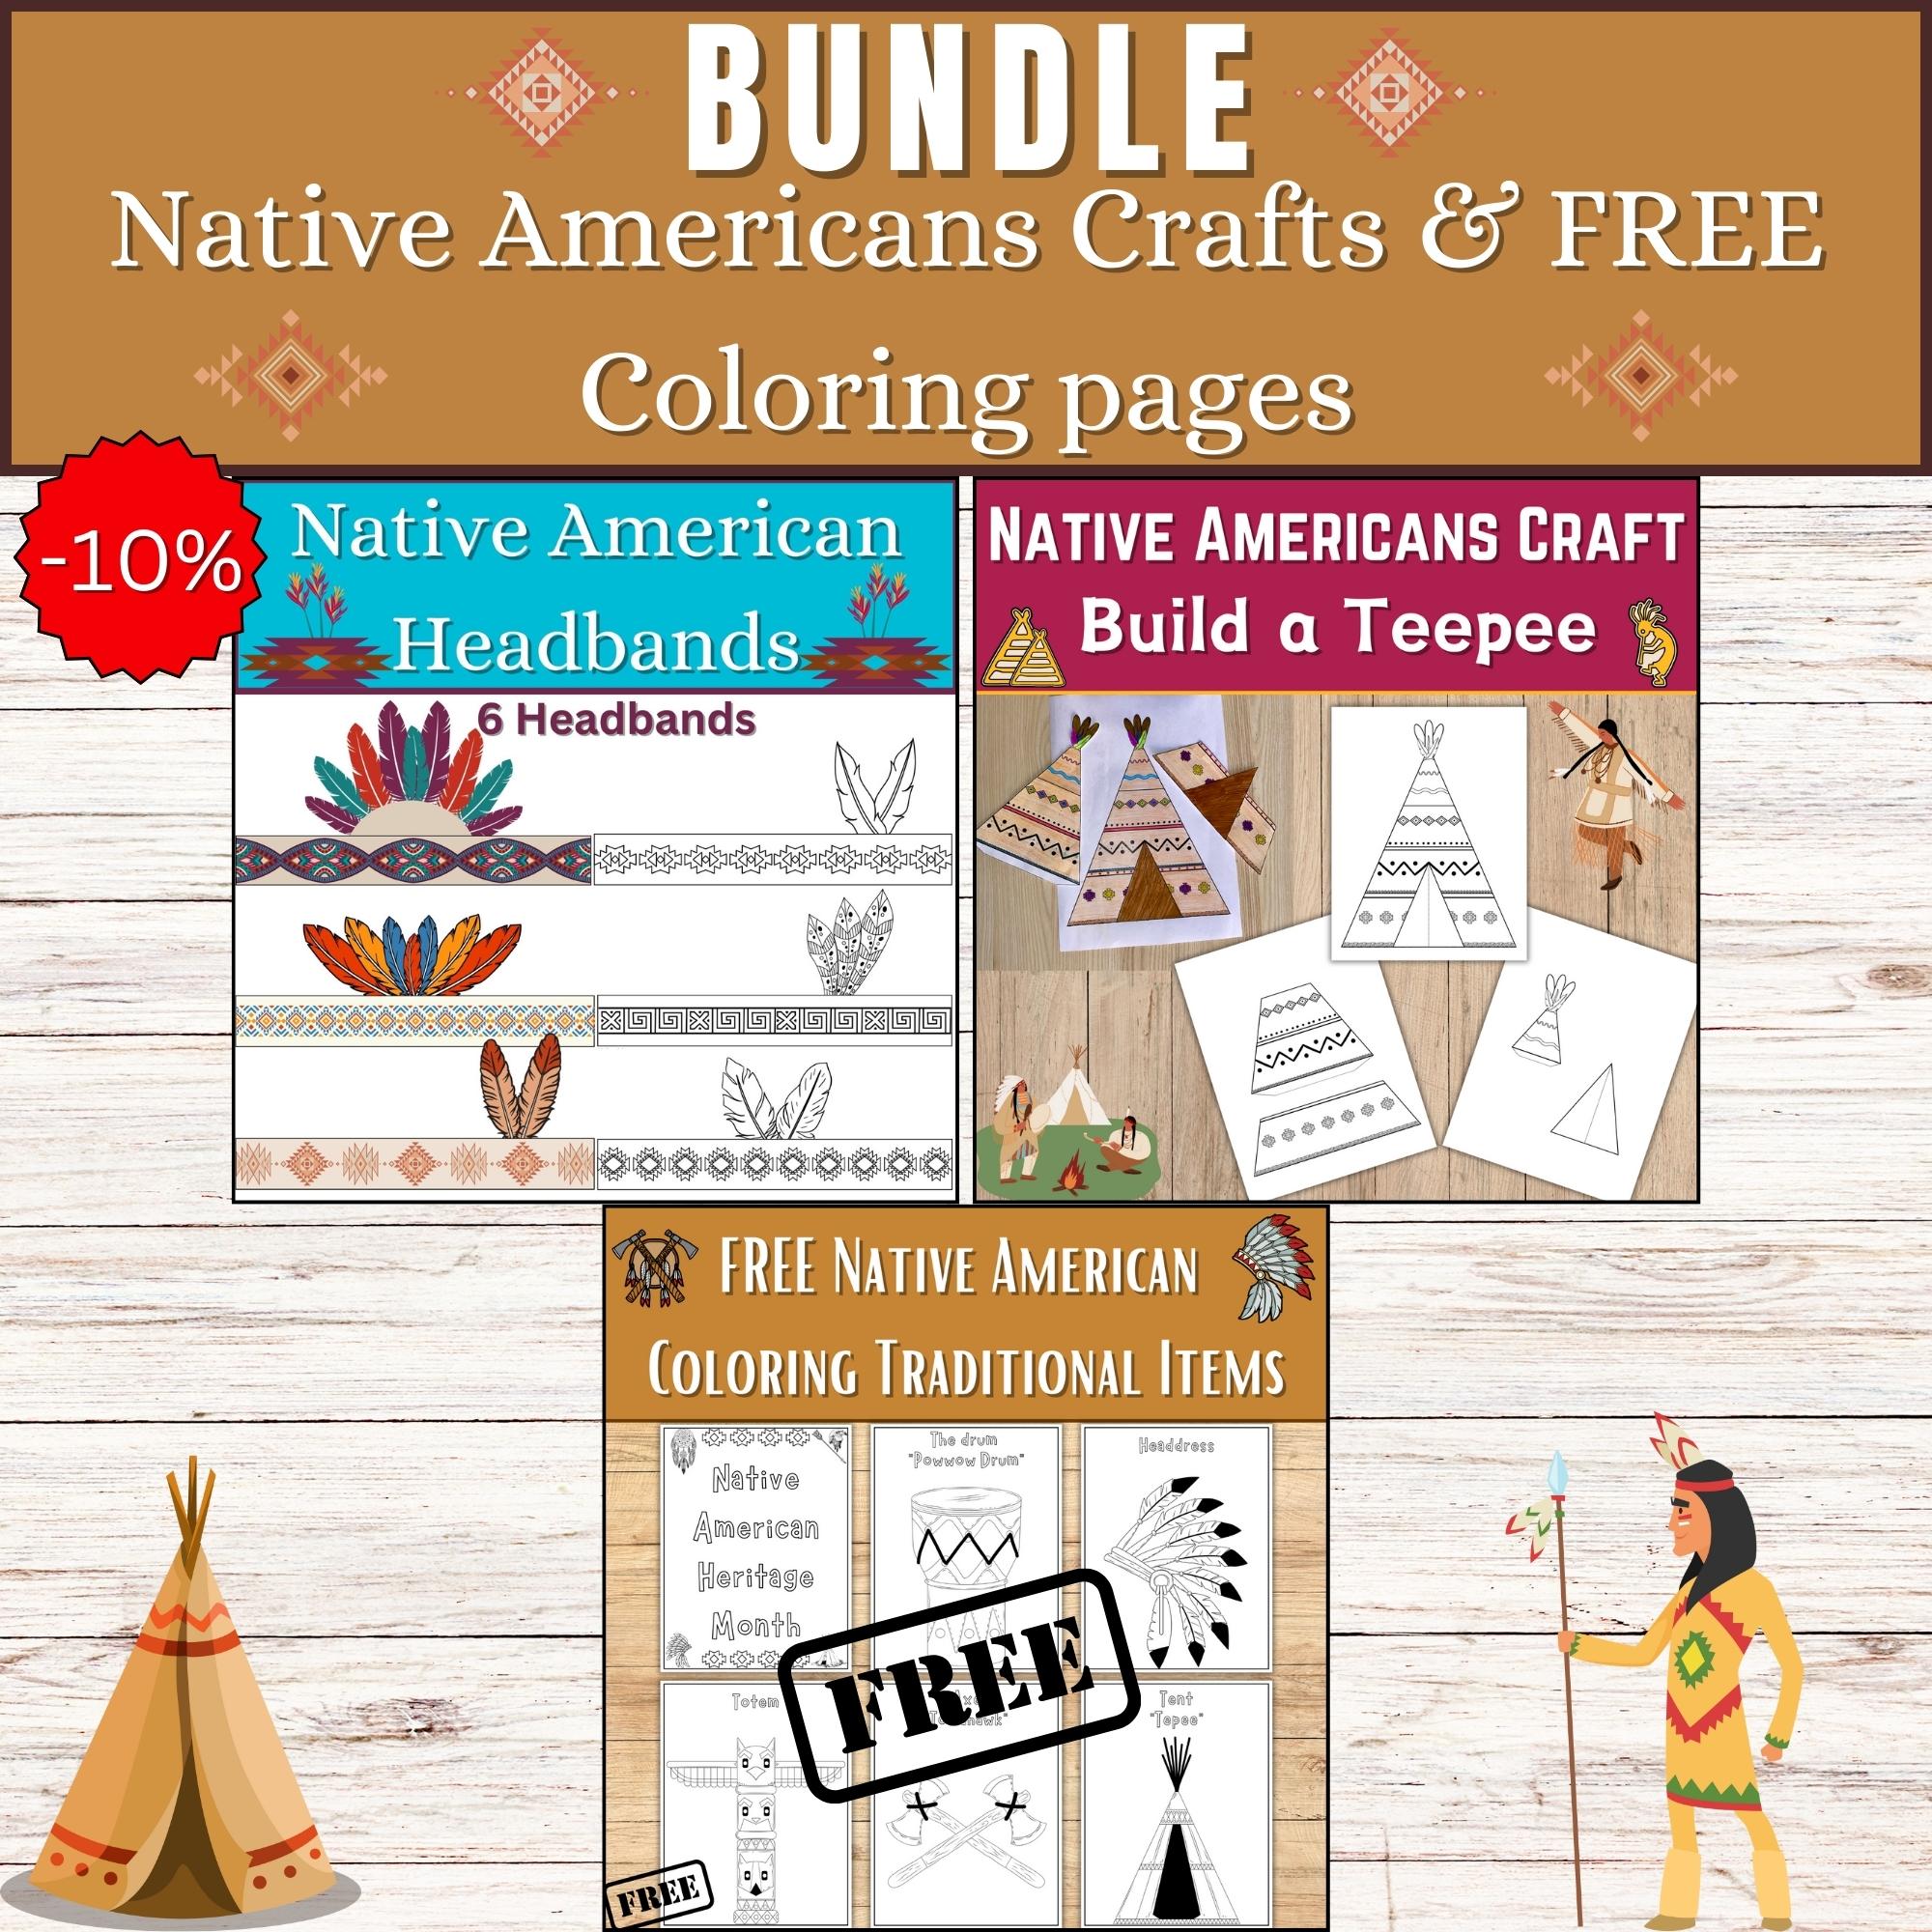 Bundle native americans headbandcrownfeather build a d teepeetipi crafts free native coloring made by teachers